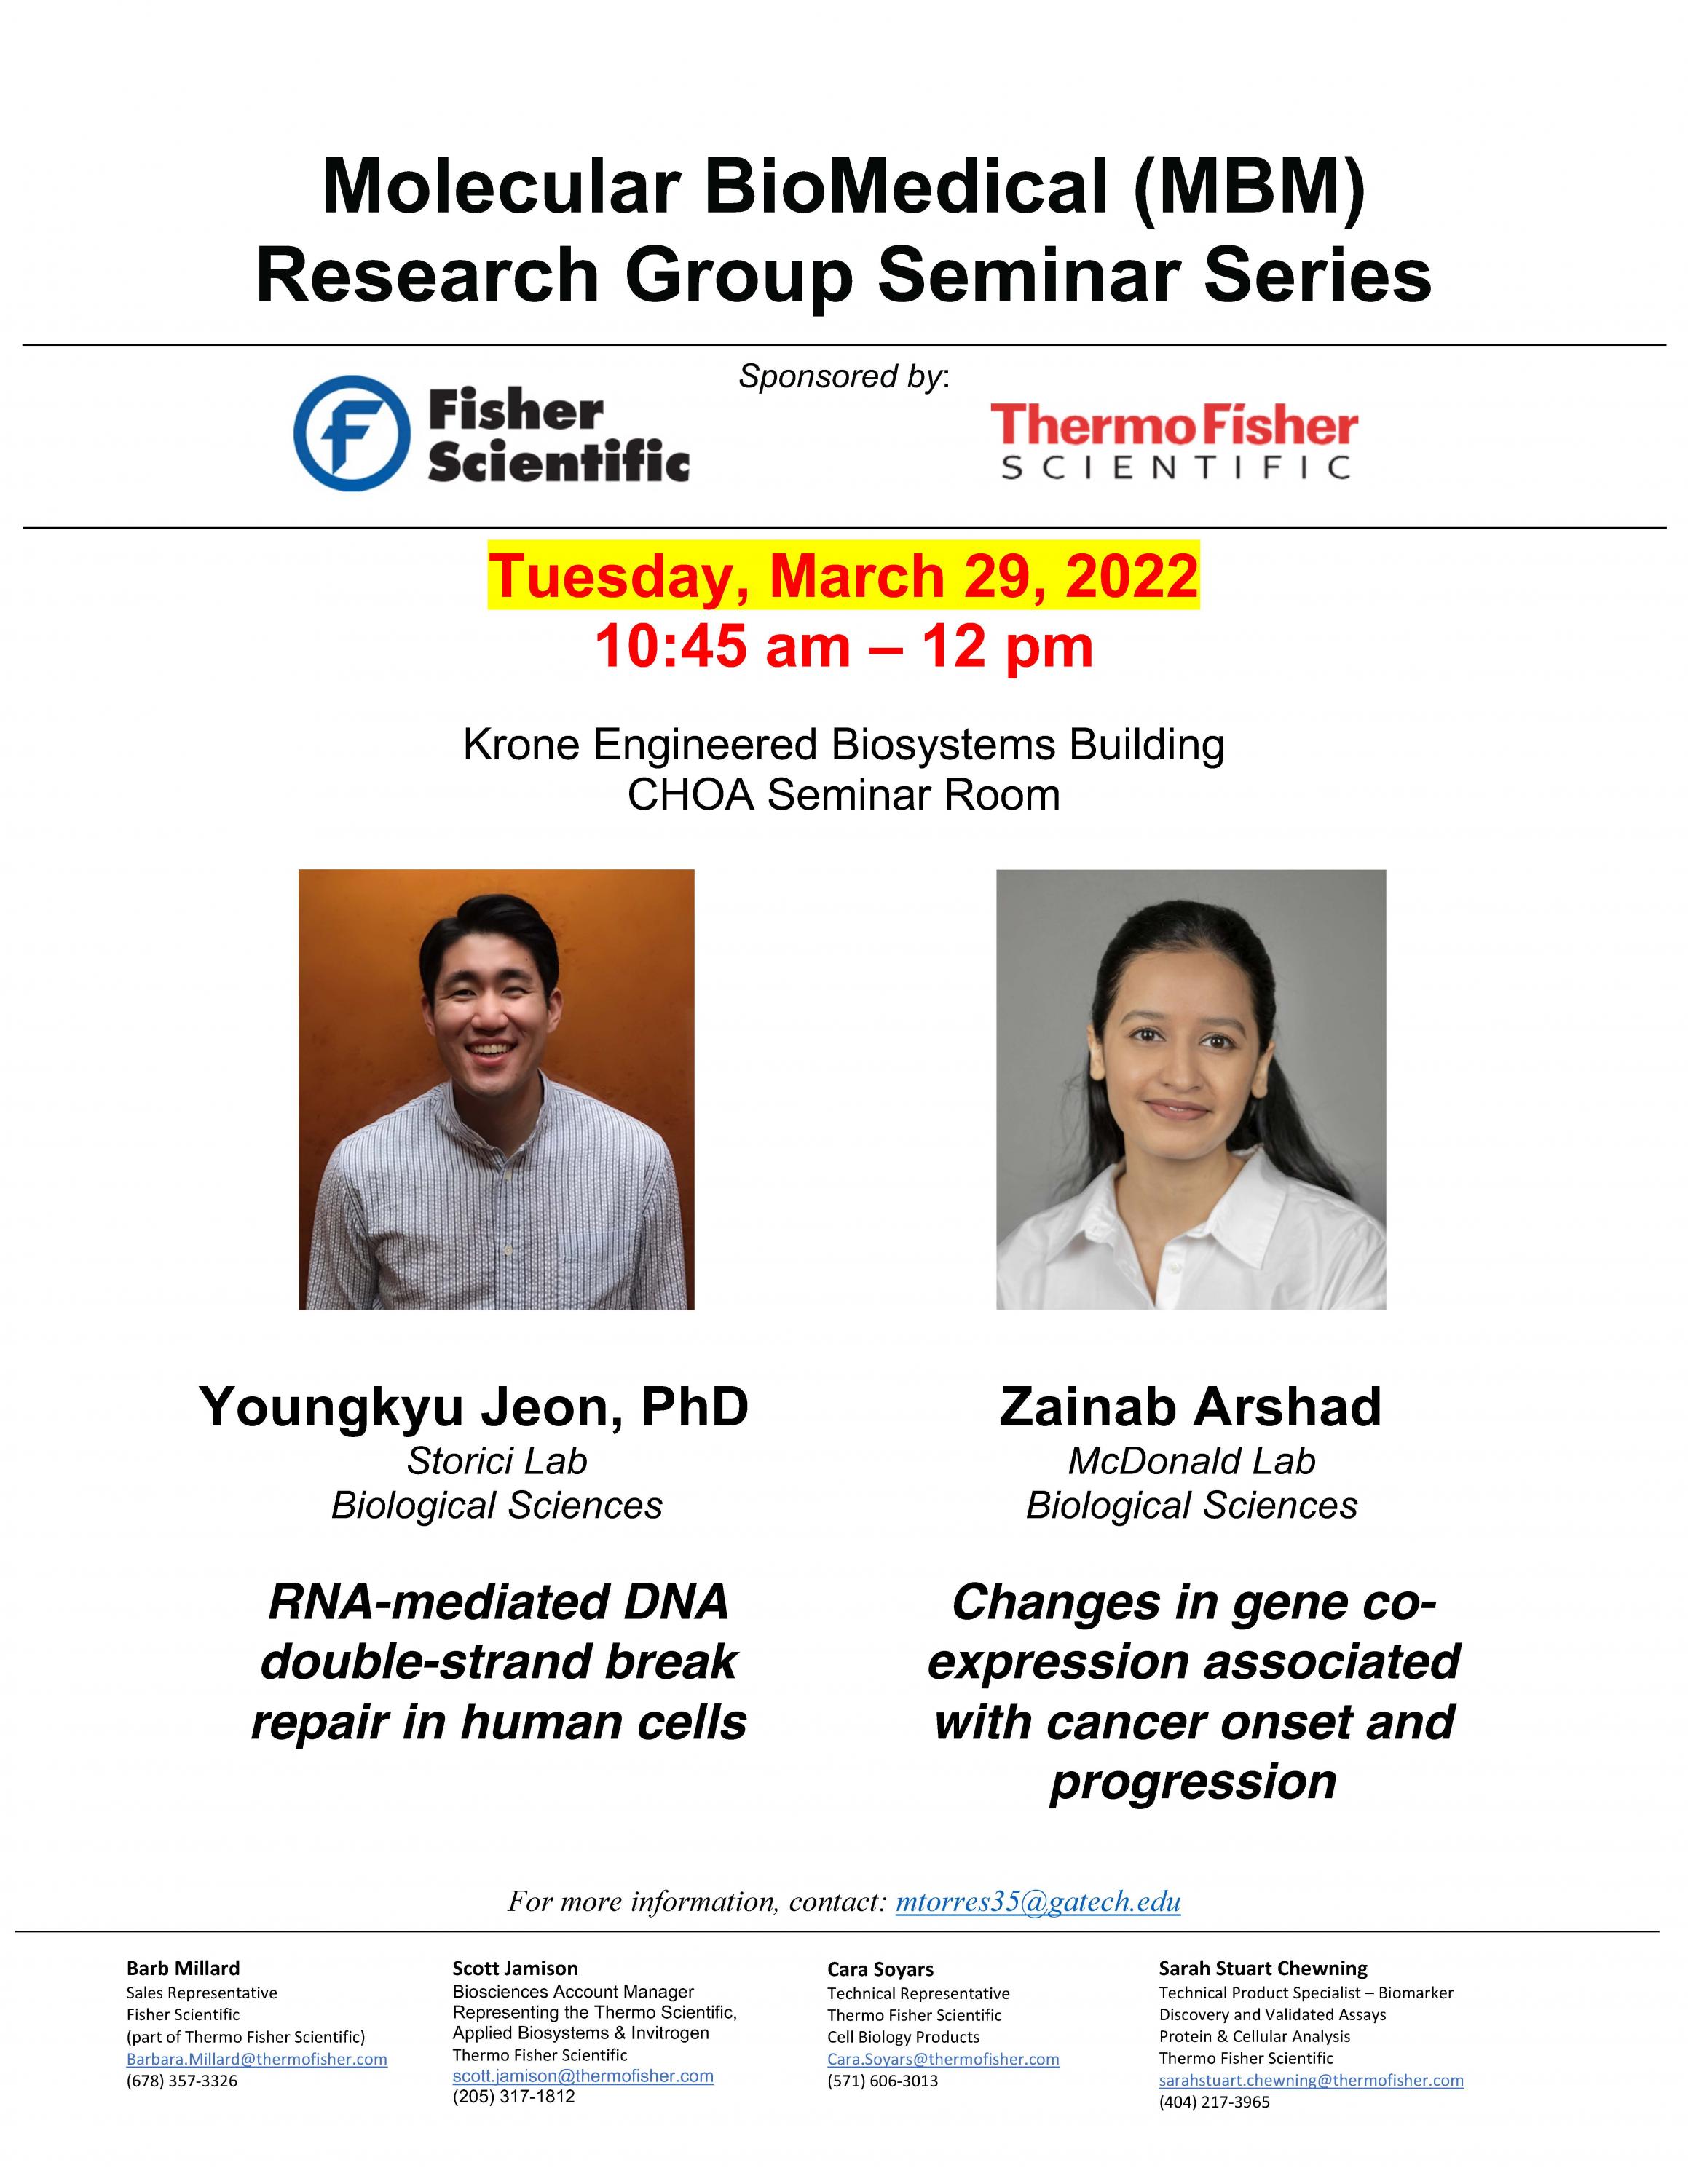 MBM Research Group Seminar - March 29, 2022